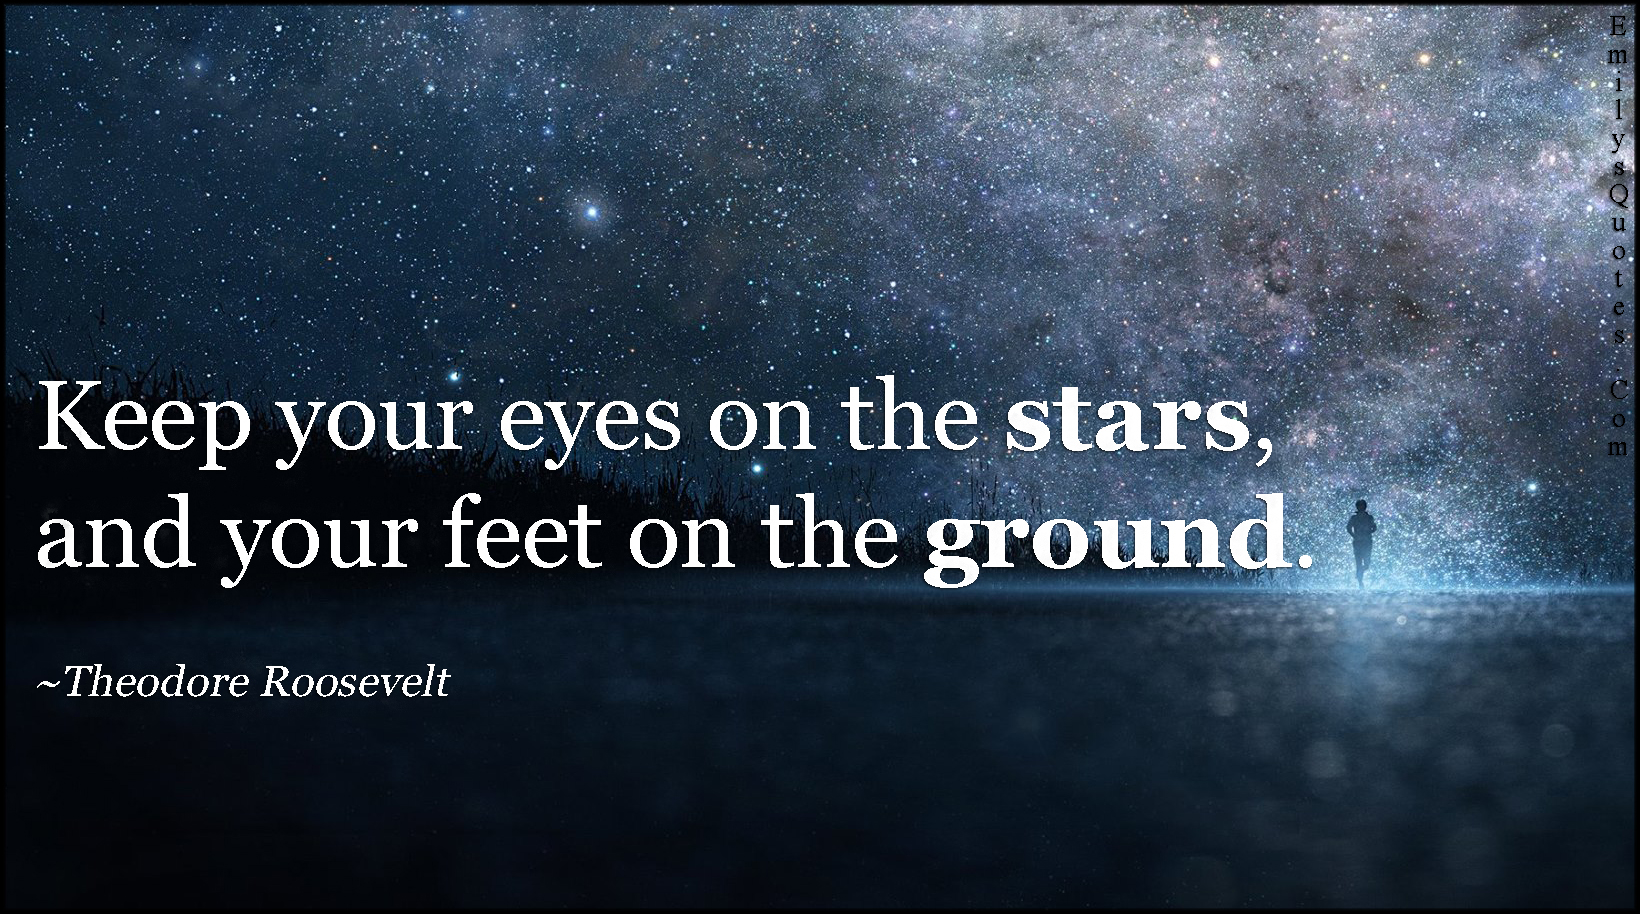 Keep your eyes on the stars, and your feet on the ground